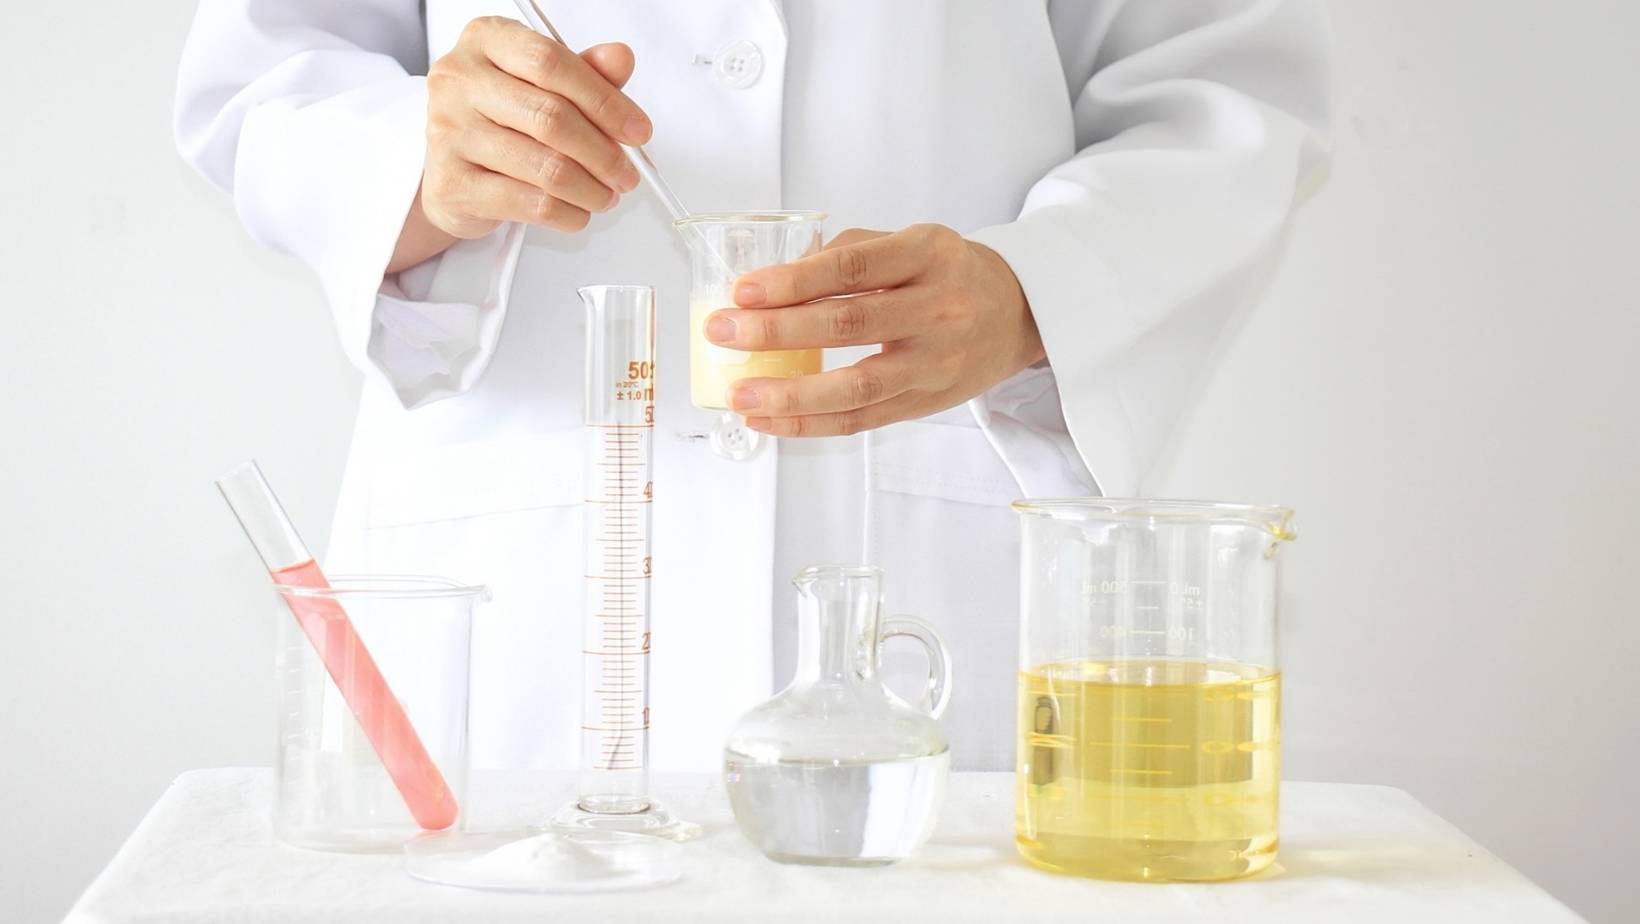 How To Select a Chemical Supplier and Manufacturer for your formulation